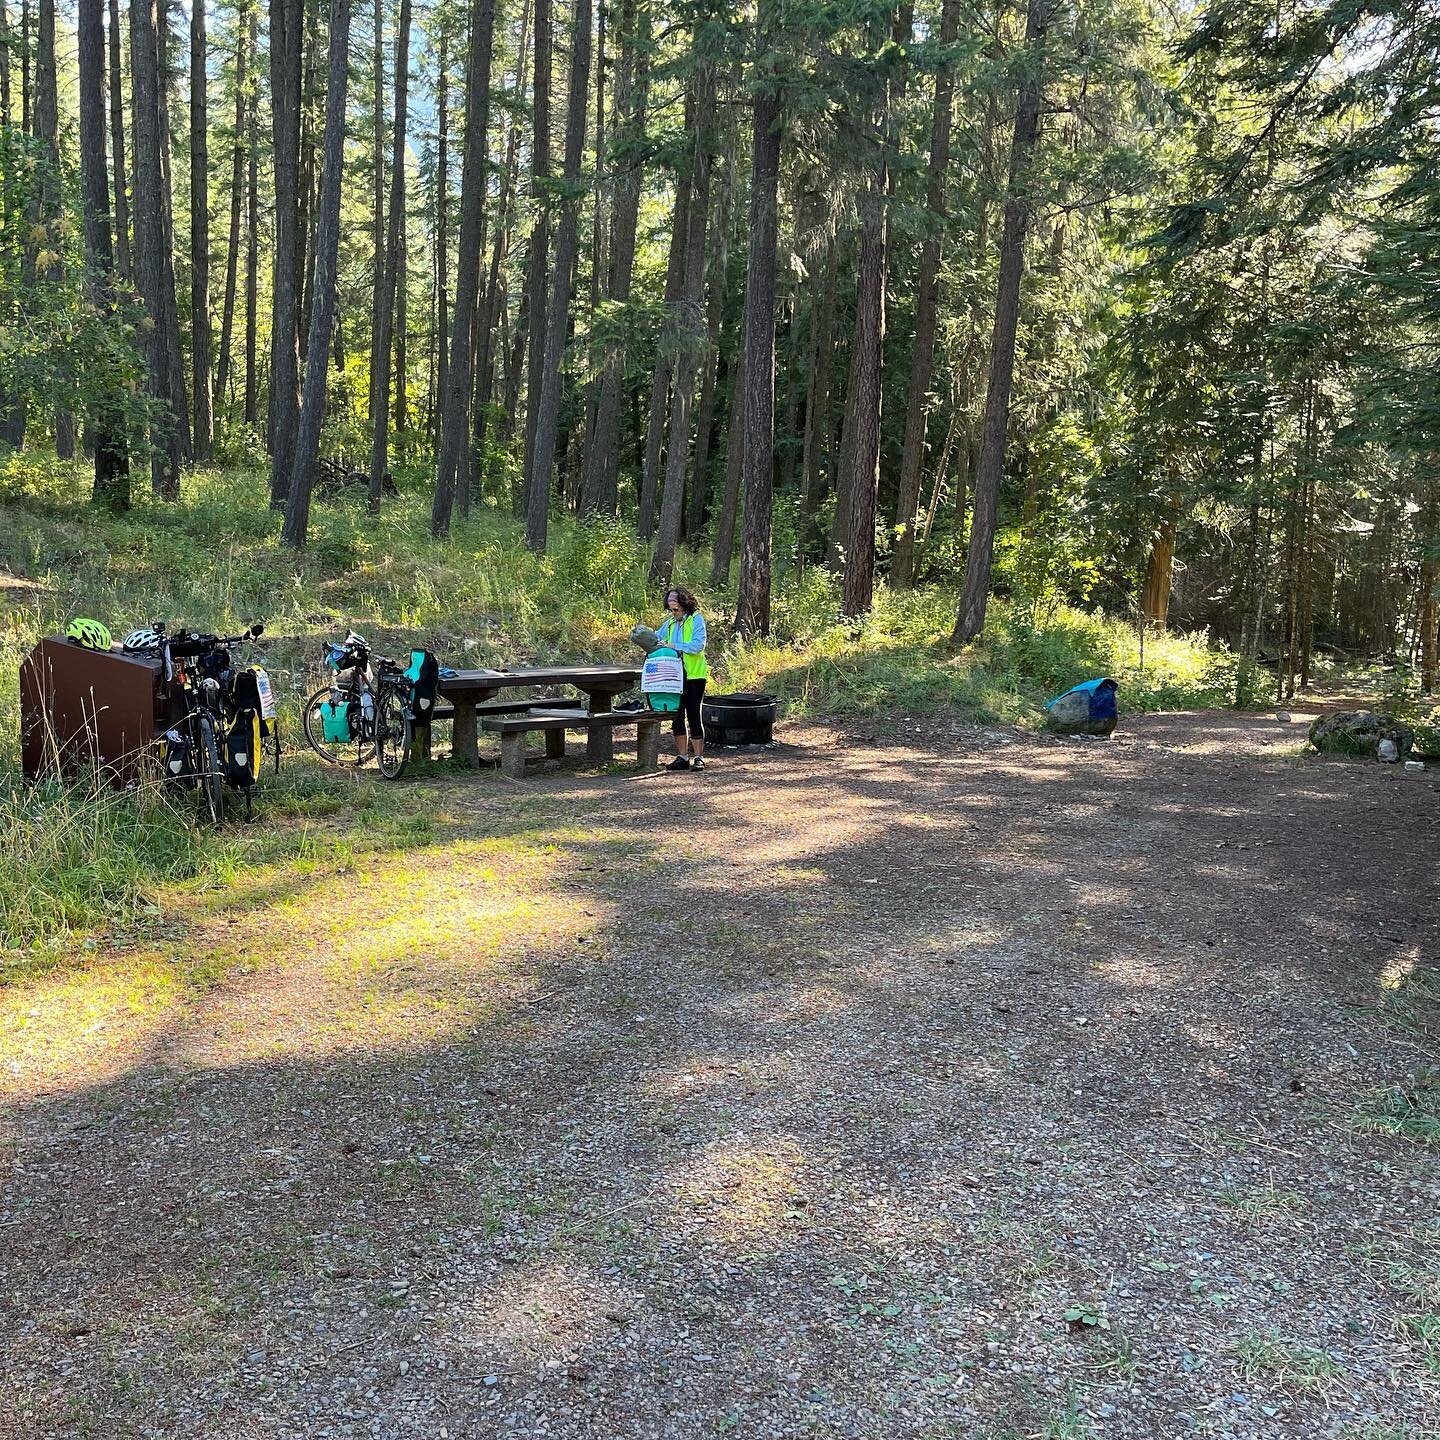 On Saturday, 8/13 Pedaling until 7:00 pm is absolutley not our style, regardless of daylight . . . Ah, A time zone snuck up on us . . . but neither is pedaling until 6:00, so suddenly it&rsquo;s an hour later and camp needs set, water needs acquired 